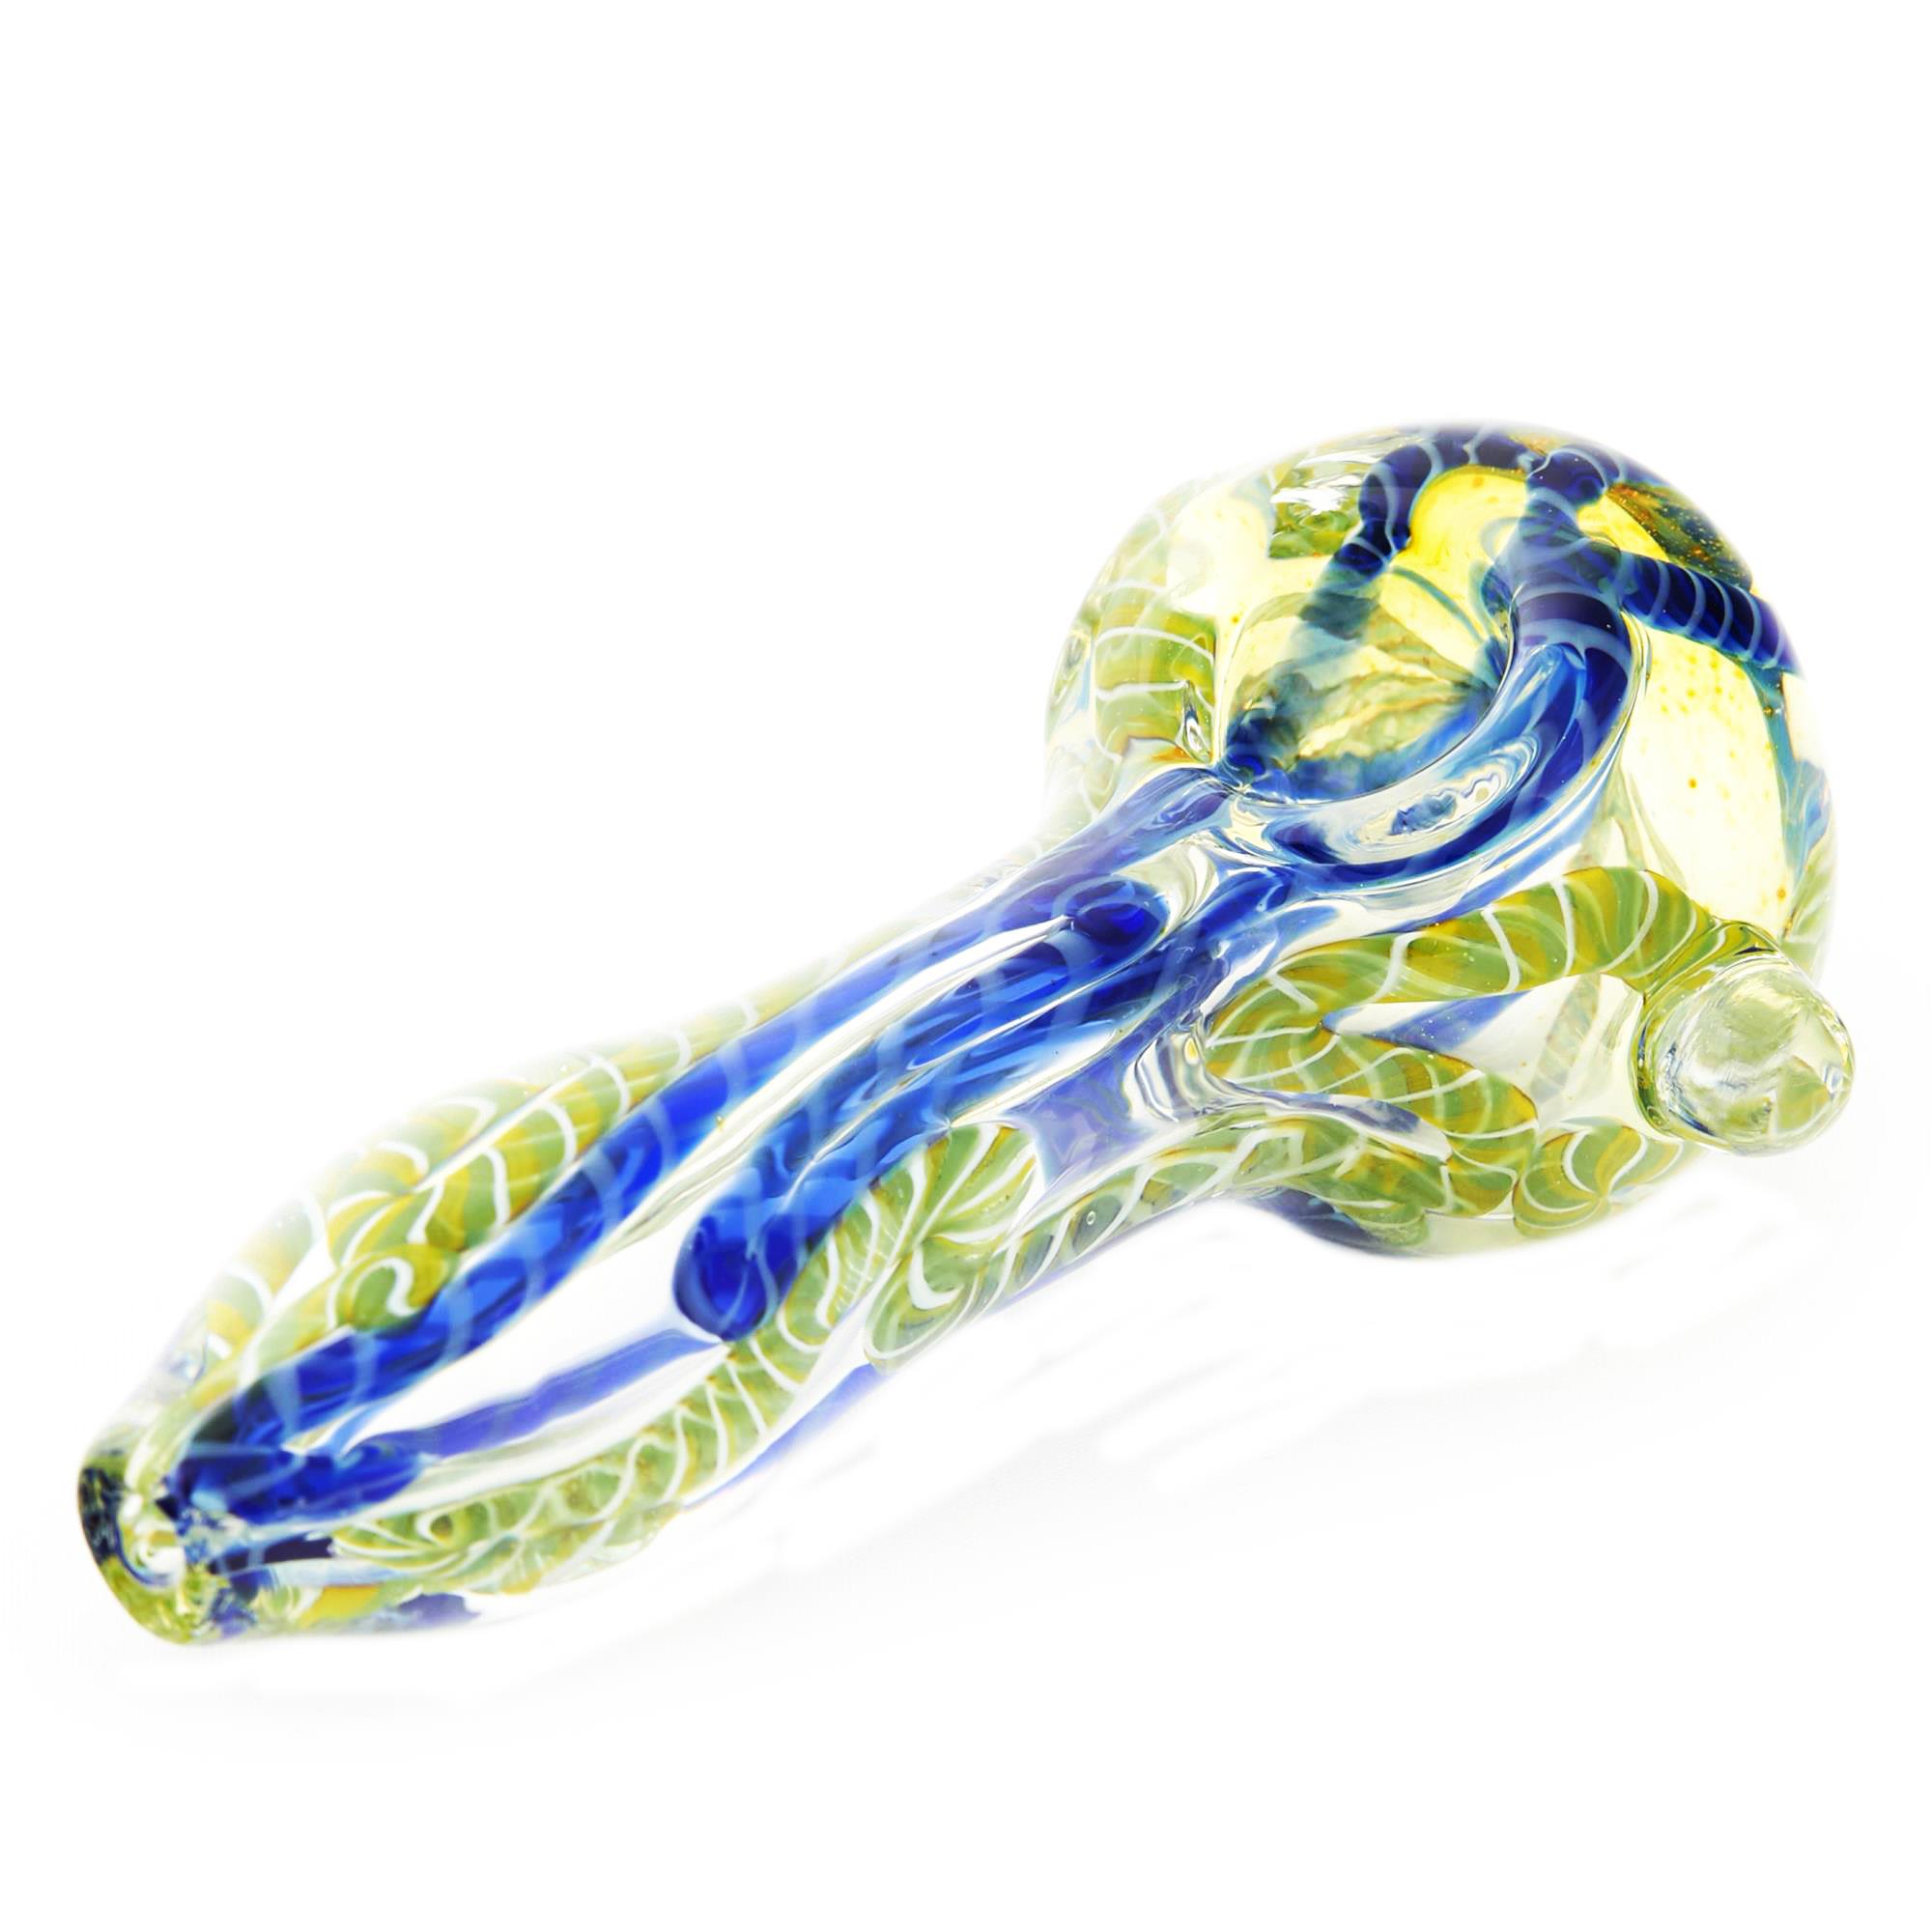 HERBALLY MEDICATED SPOON PIPE